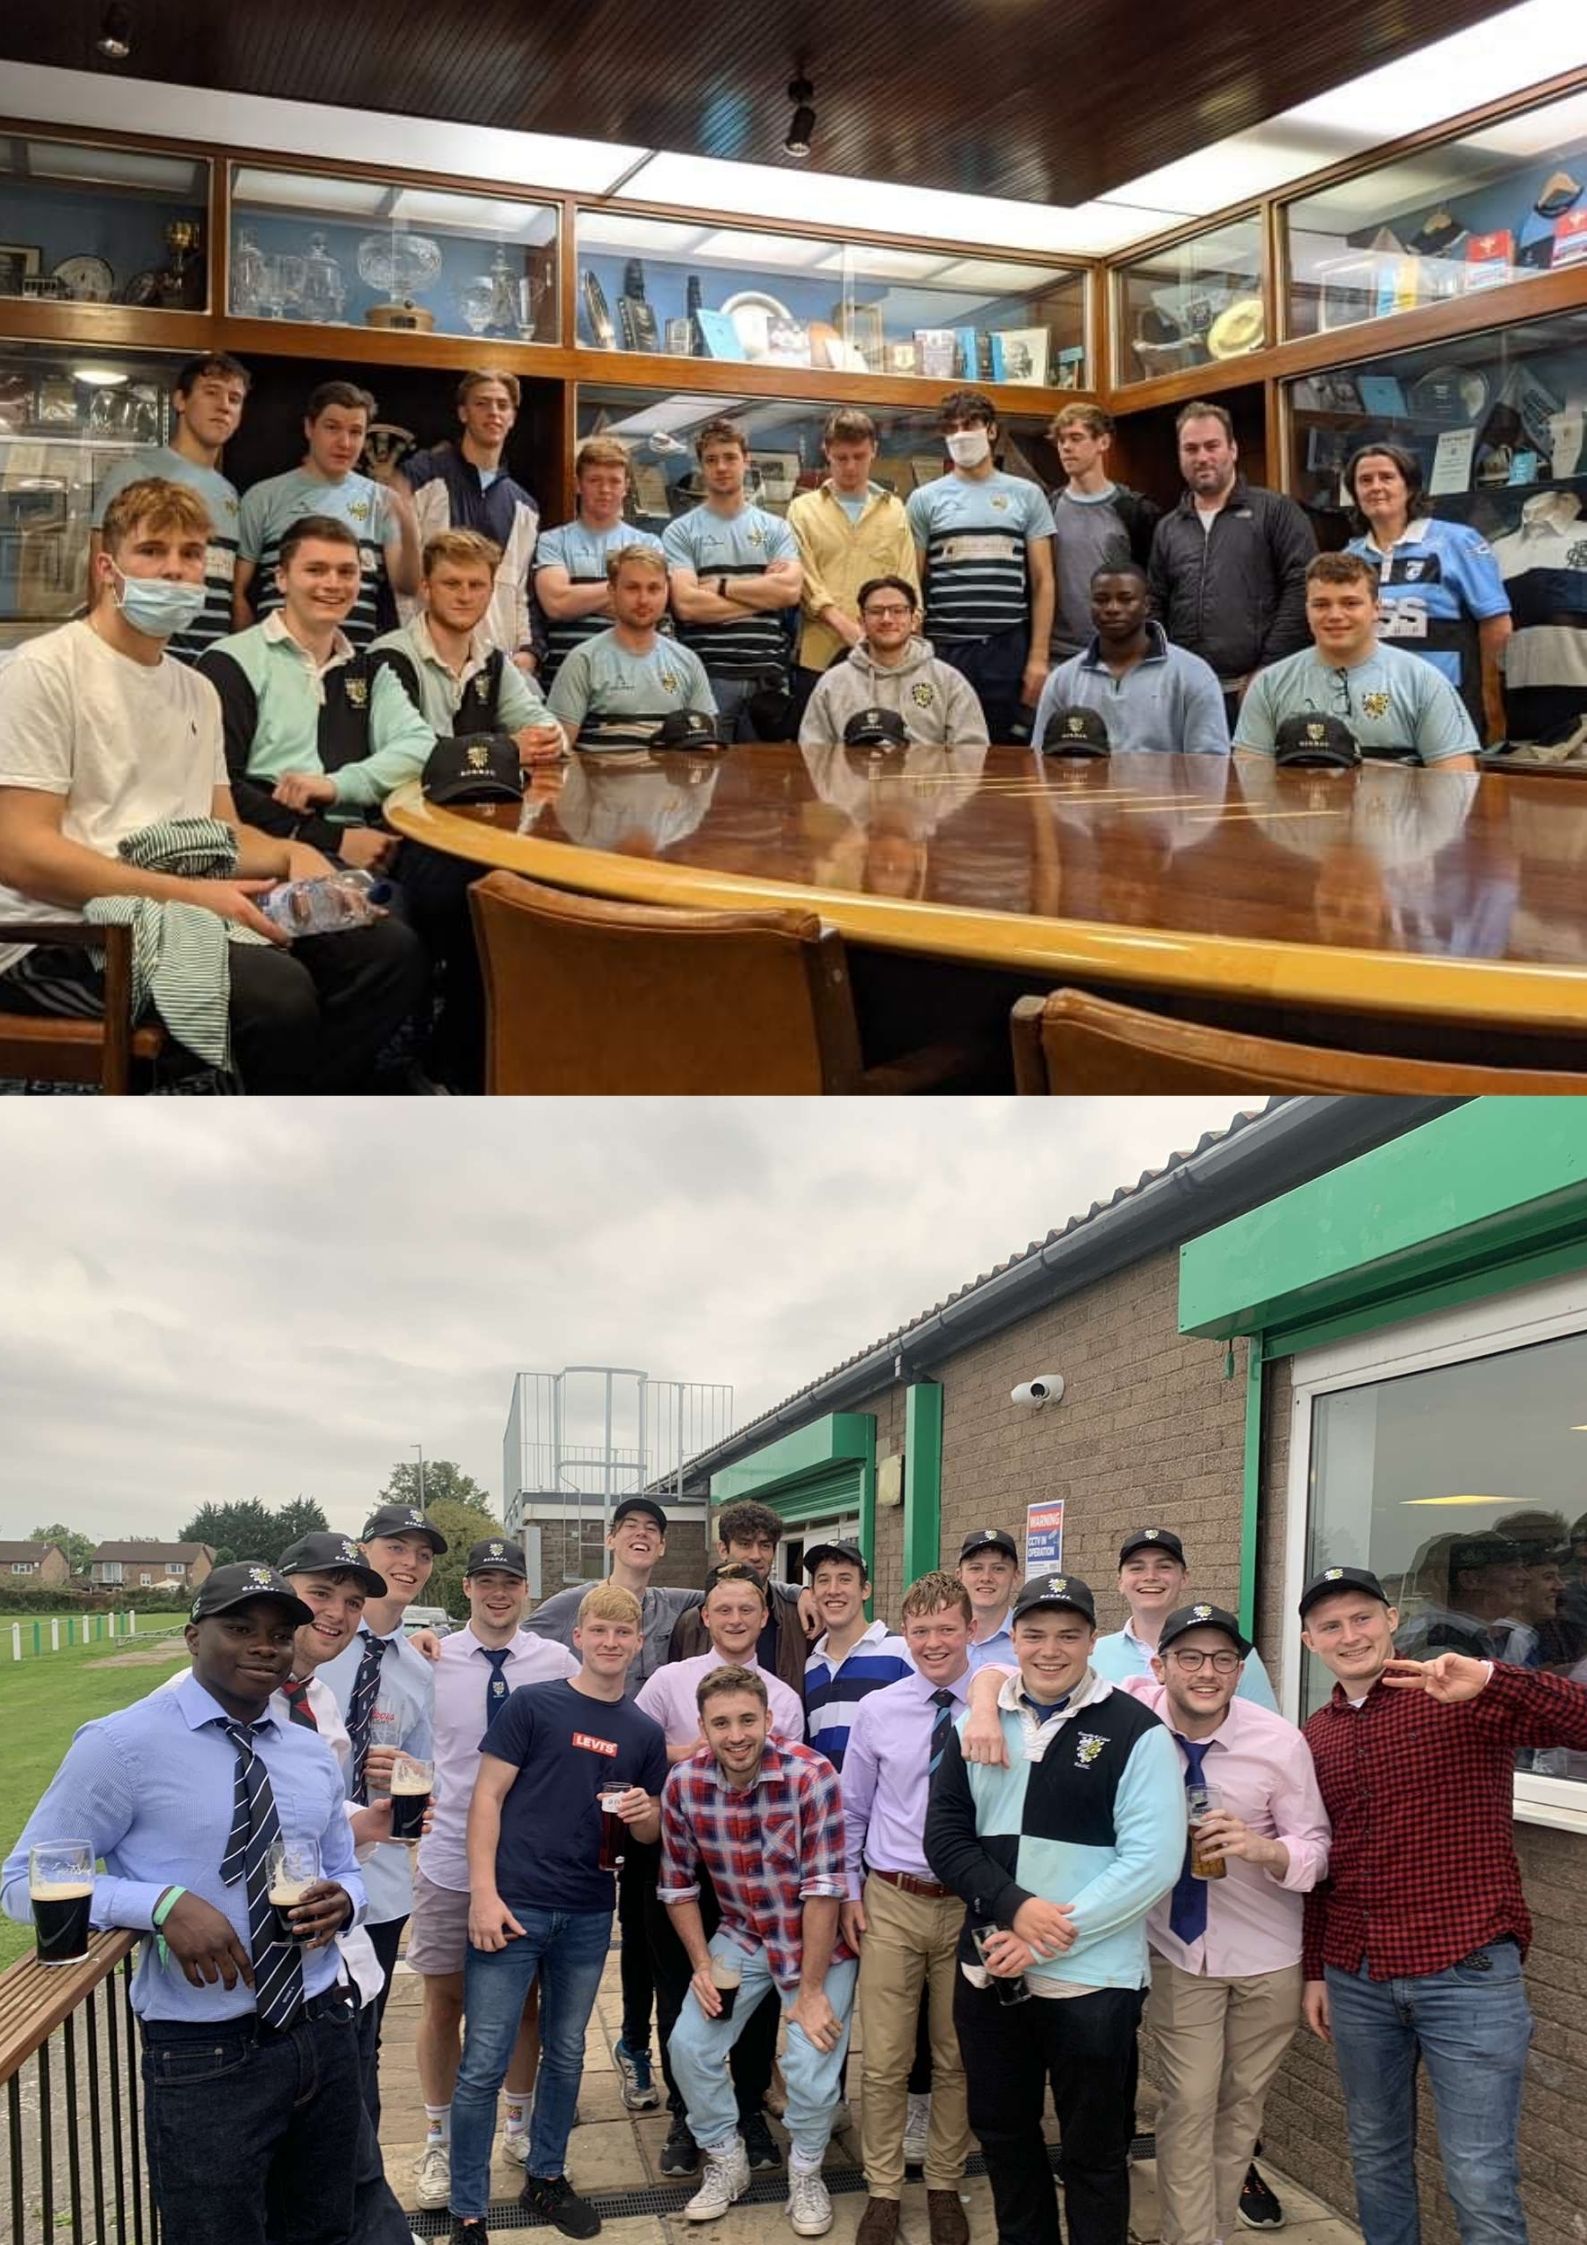 Two photos showing Caius rugby players on tour, one in a museum and one by a rugby pitch